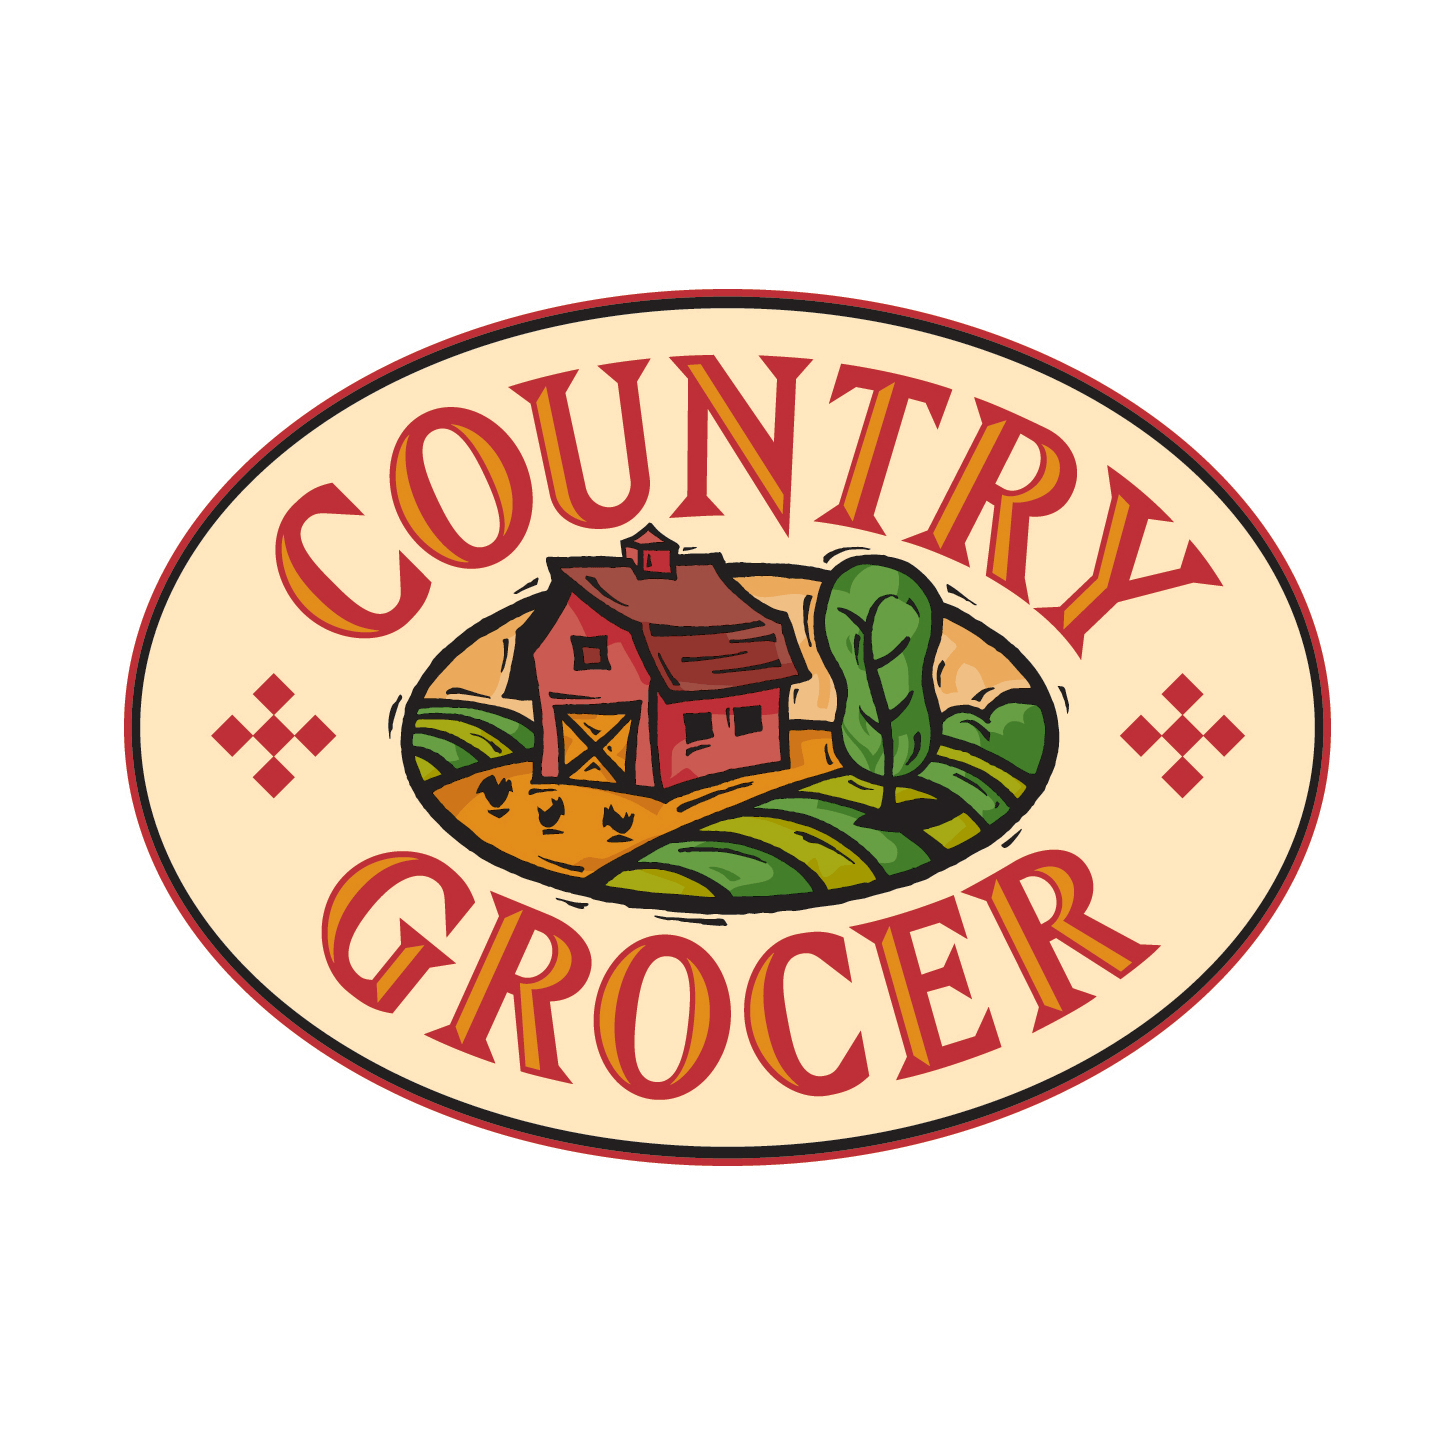 Country Logo - Country-Grocer-hi-res-logo - Habitat For Humanity